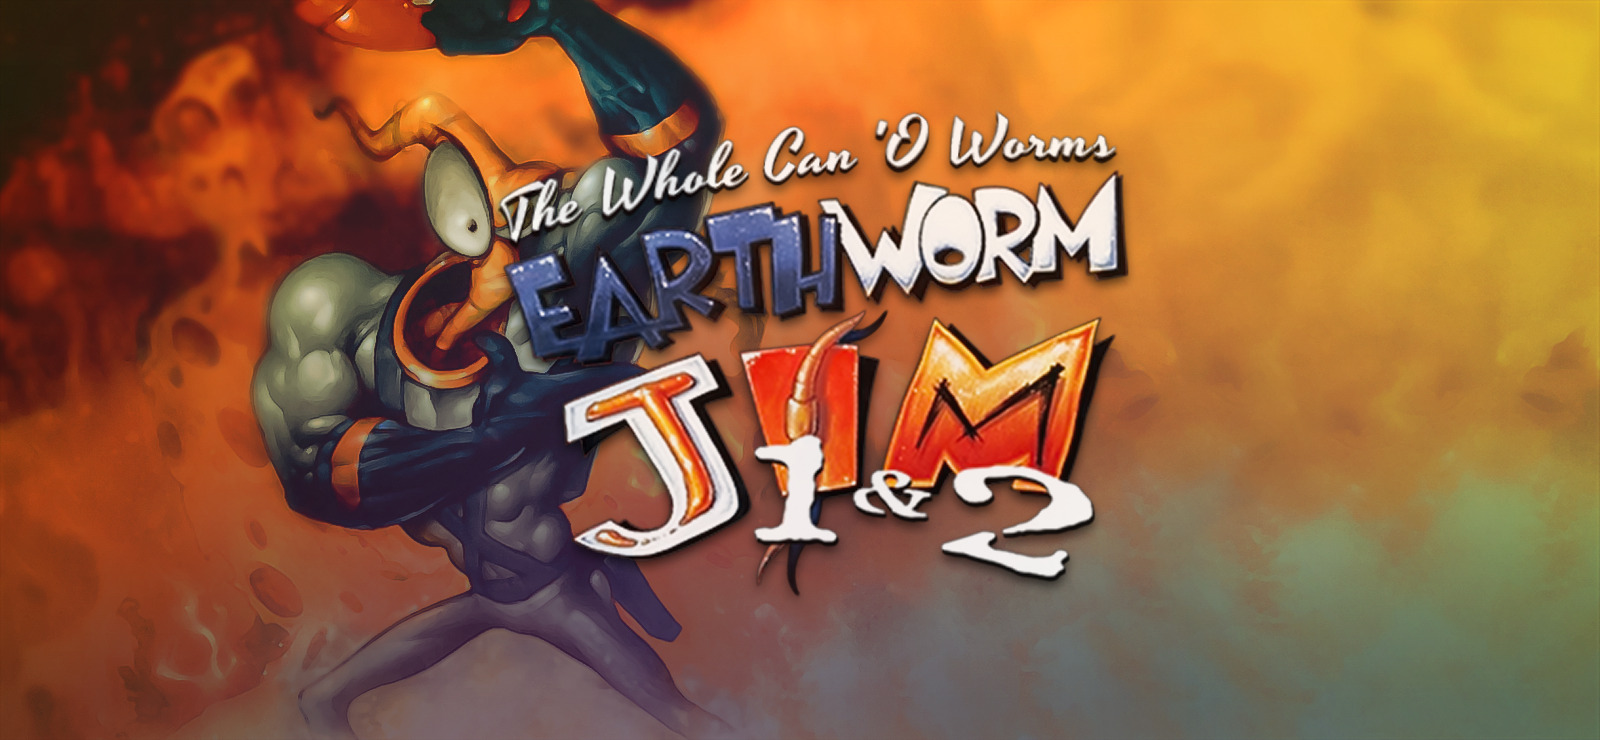 Earthworm Jim 1 & 2: The Whole Can O' Worms